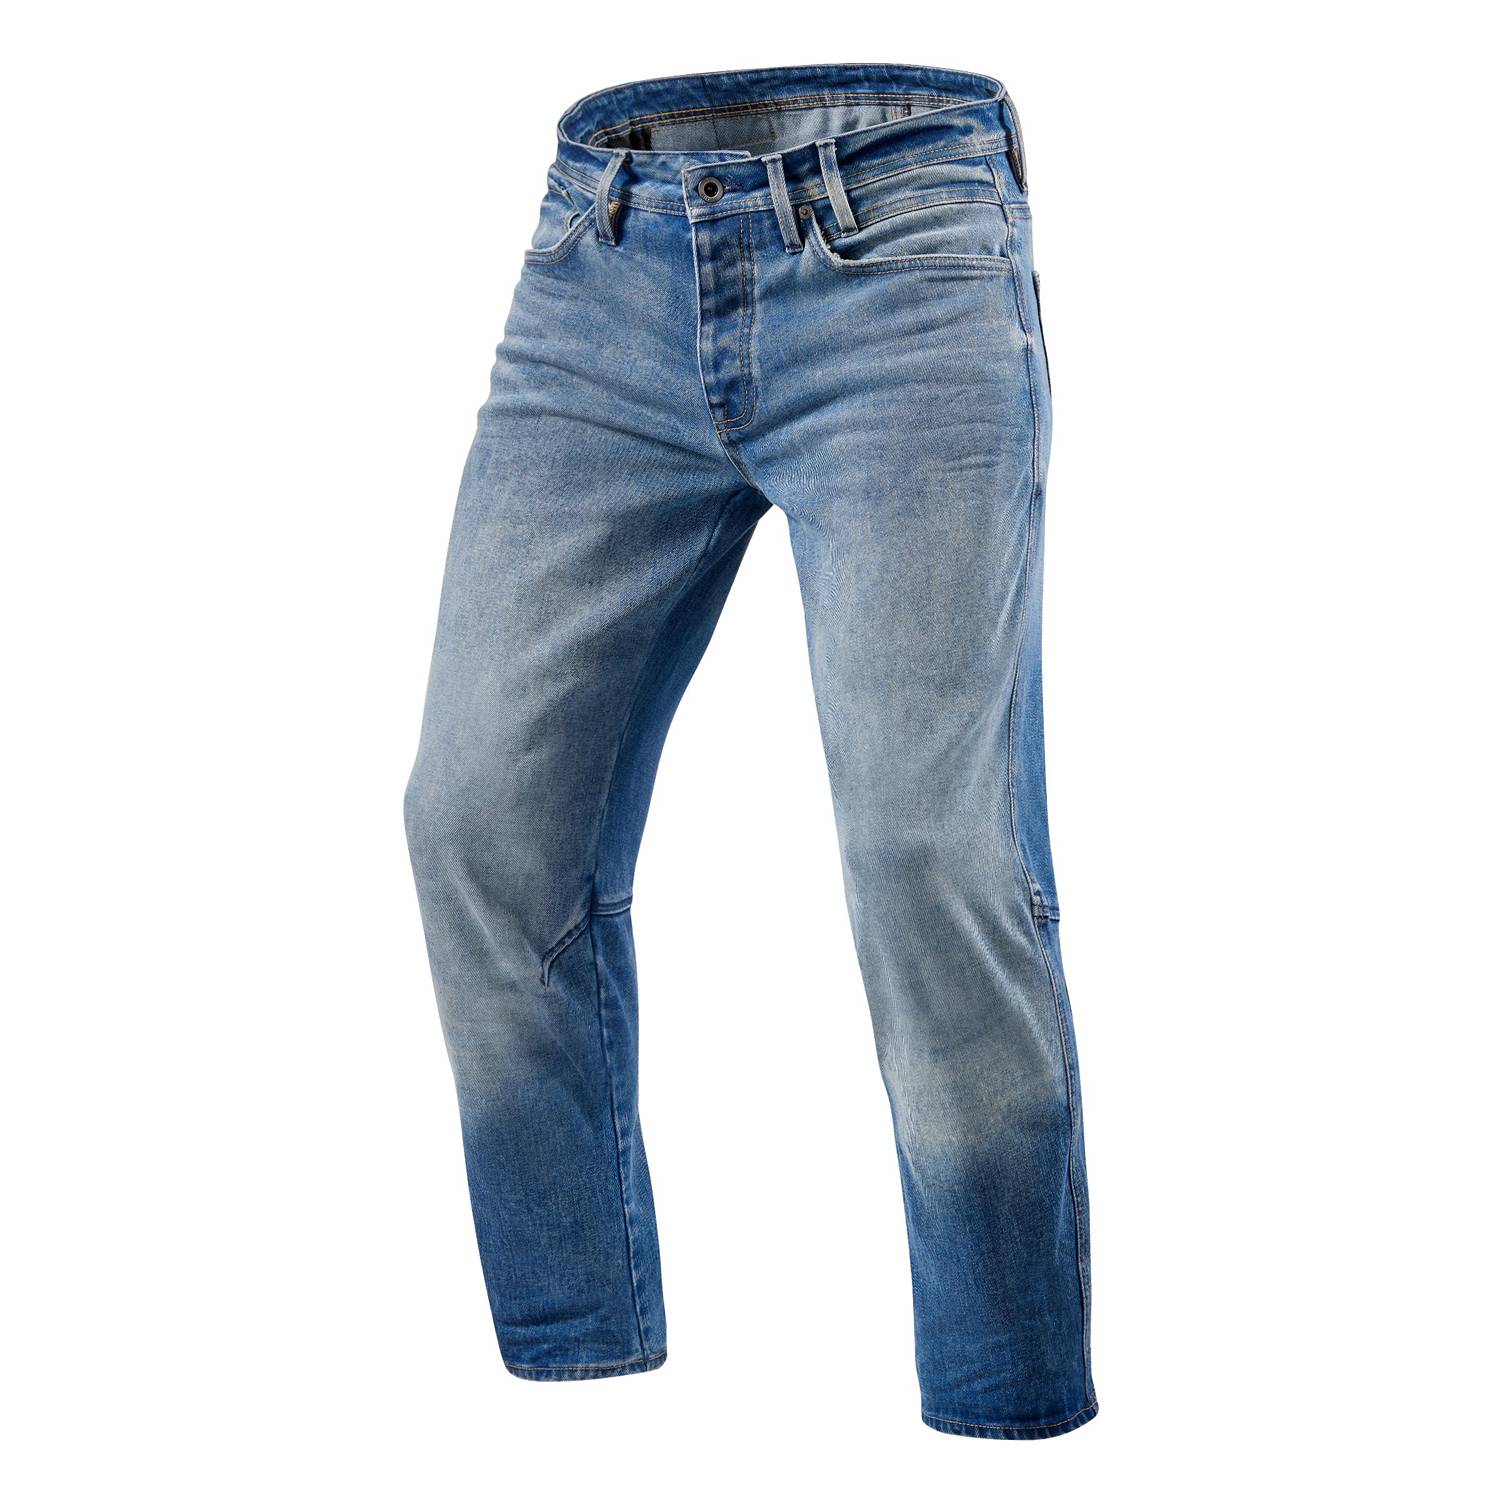 Image of REV'IT! Salt TF Mid Blue Used Motorcycle Jeans Size L34/W33 ID 8700001339070